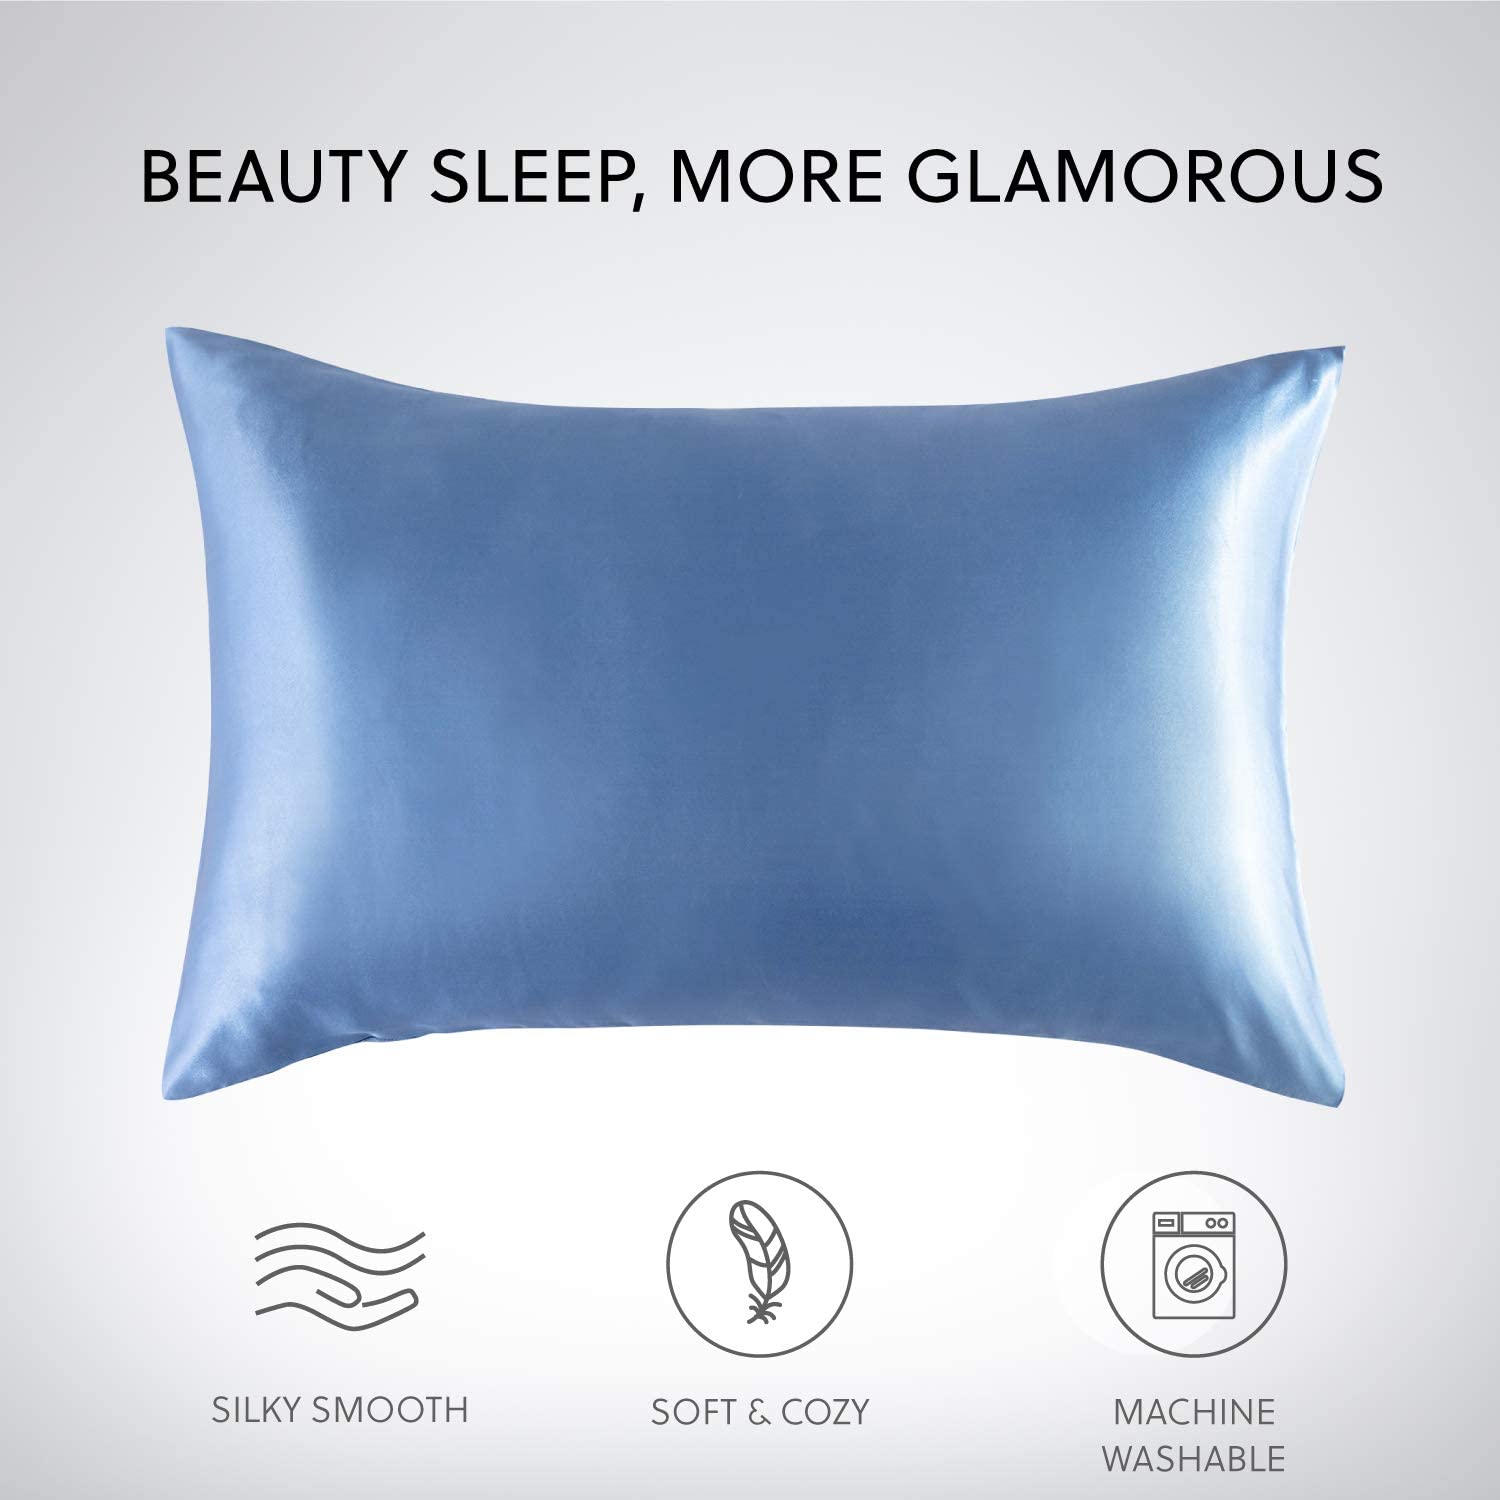 Satin Pillowcase for Hair and Skin, 2-Pack Pillow Cases - Satin Pillow Covers with Envelope Closure, Airy Blue